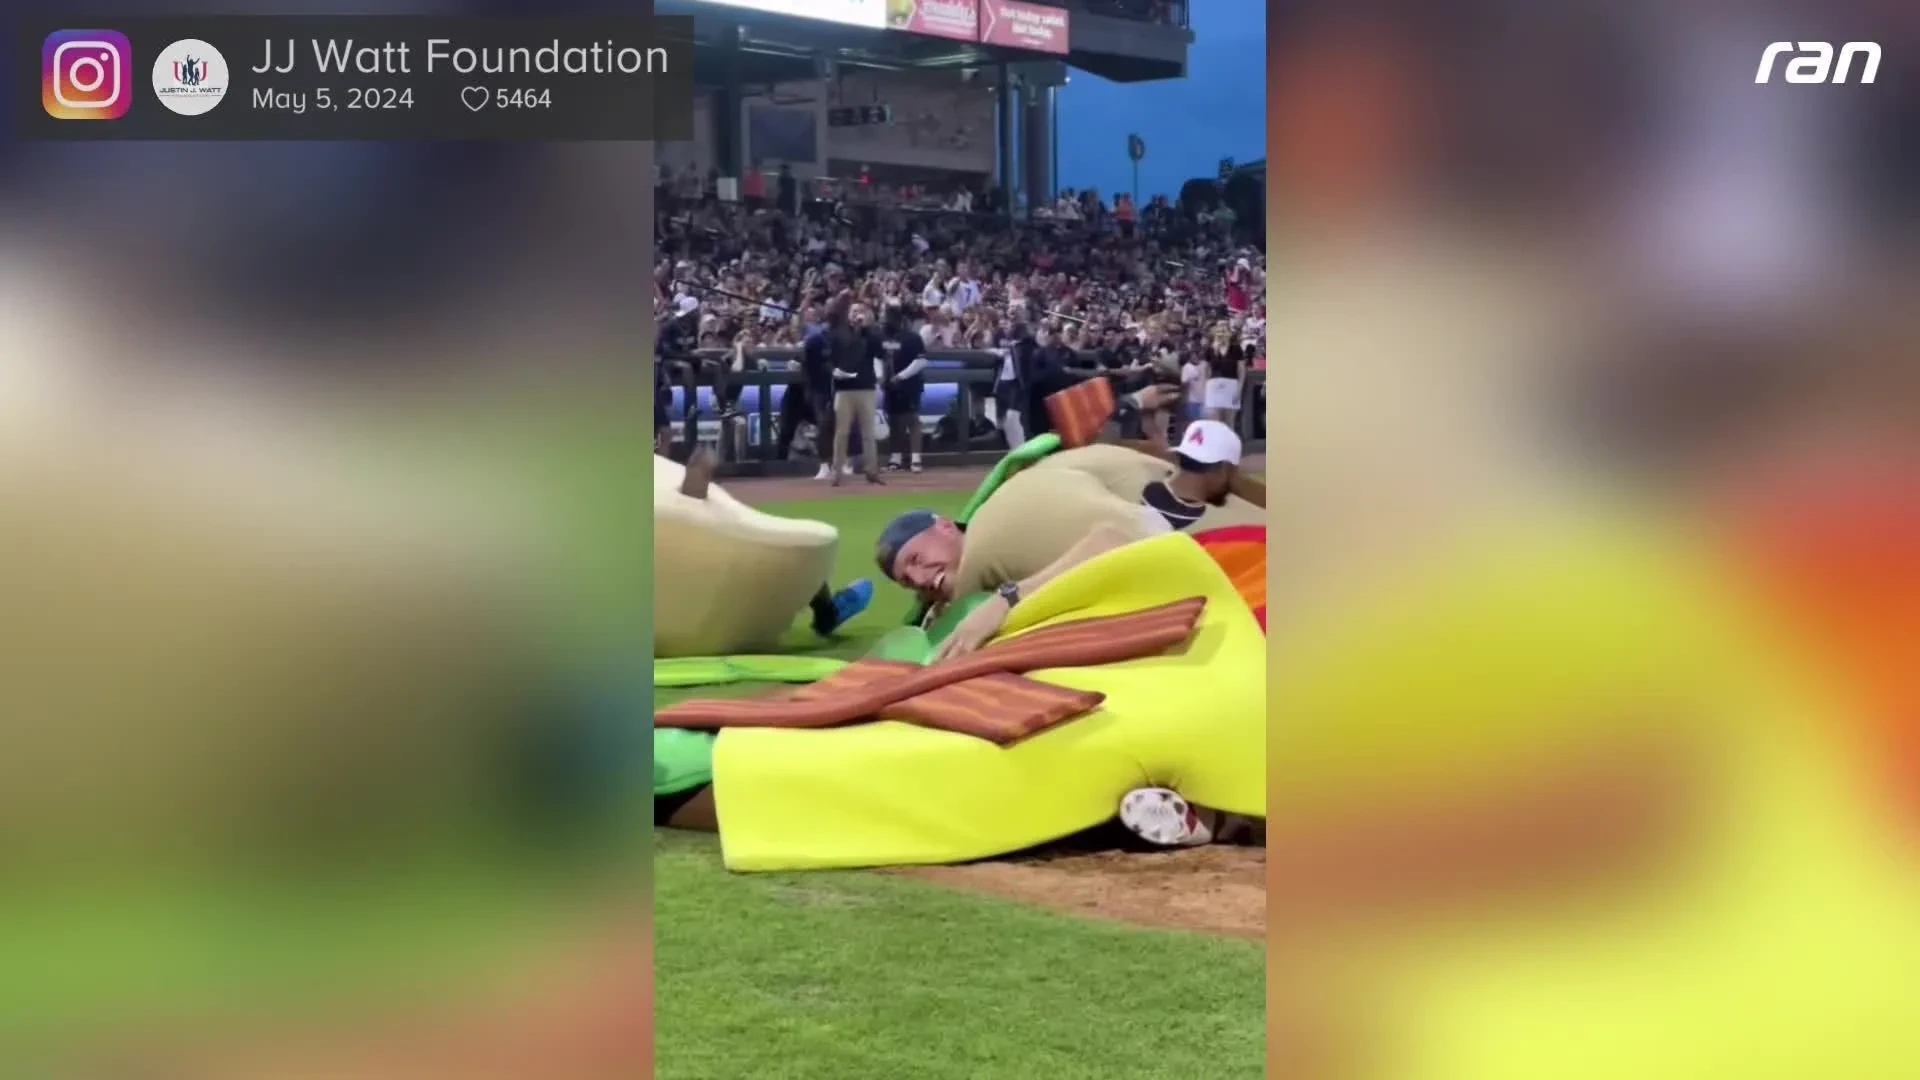 Watt in burger costume! NFL legend makes a curious charity appearance